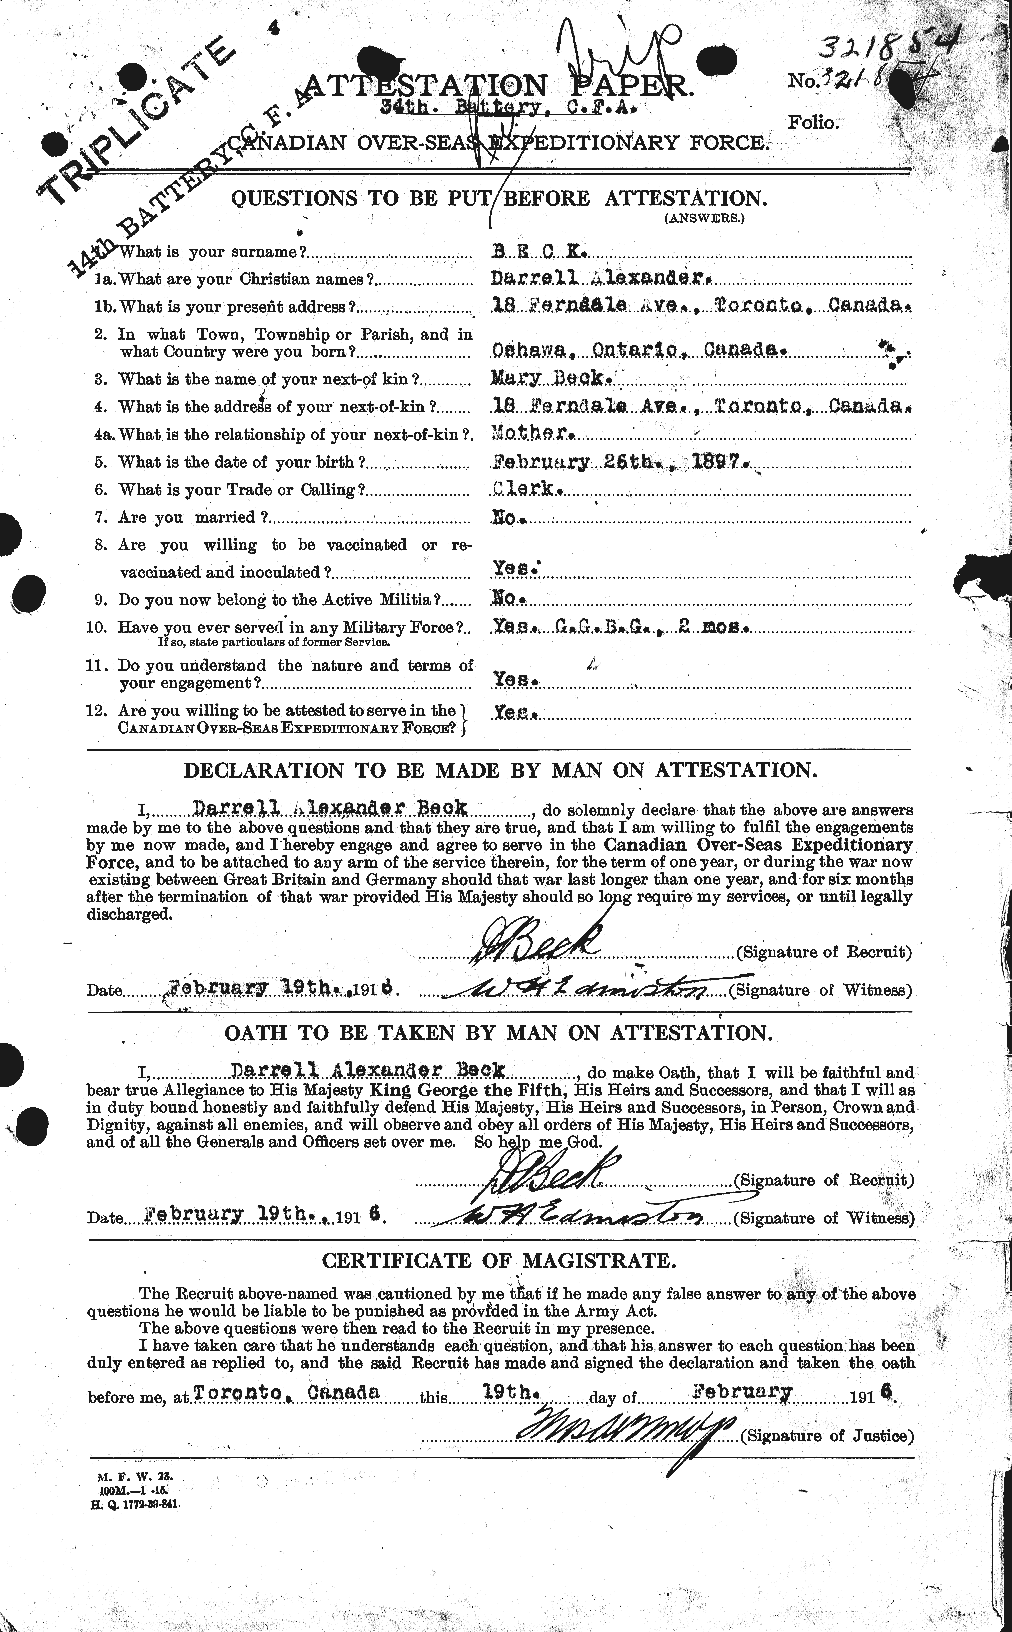 Personnel Records of the First World War - CEF 232102a